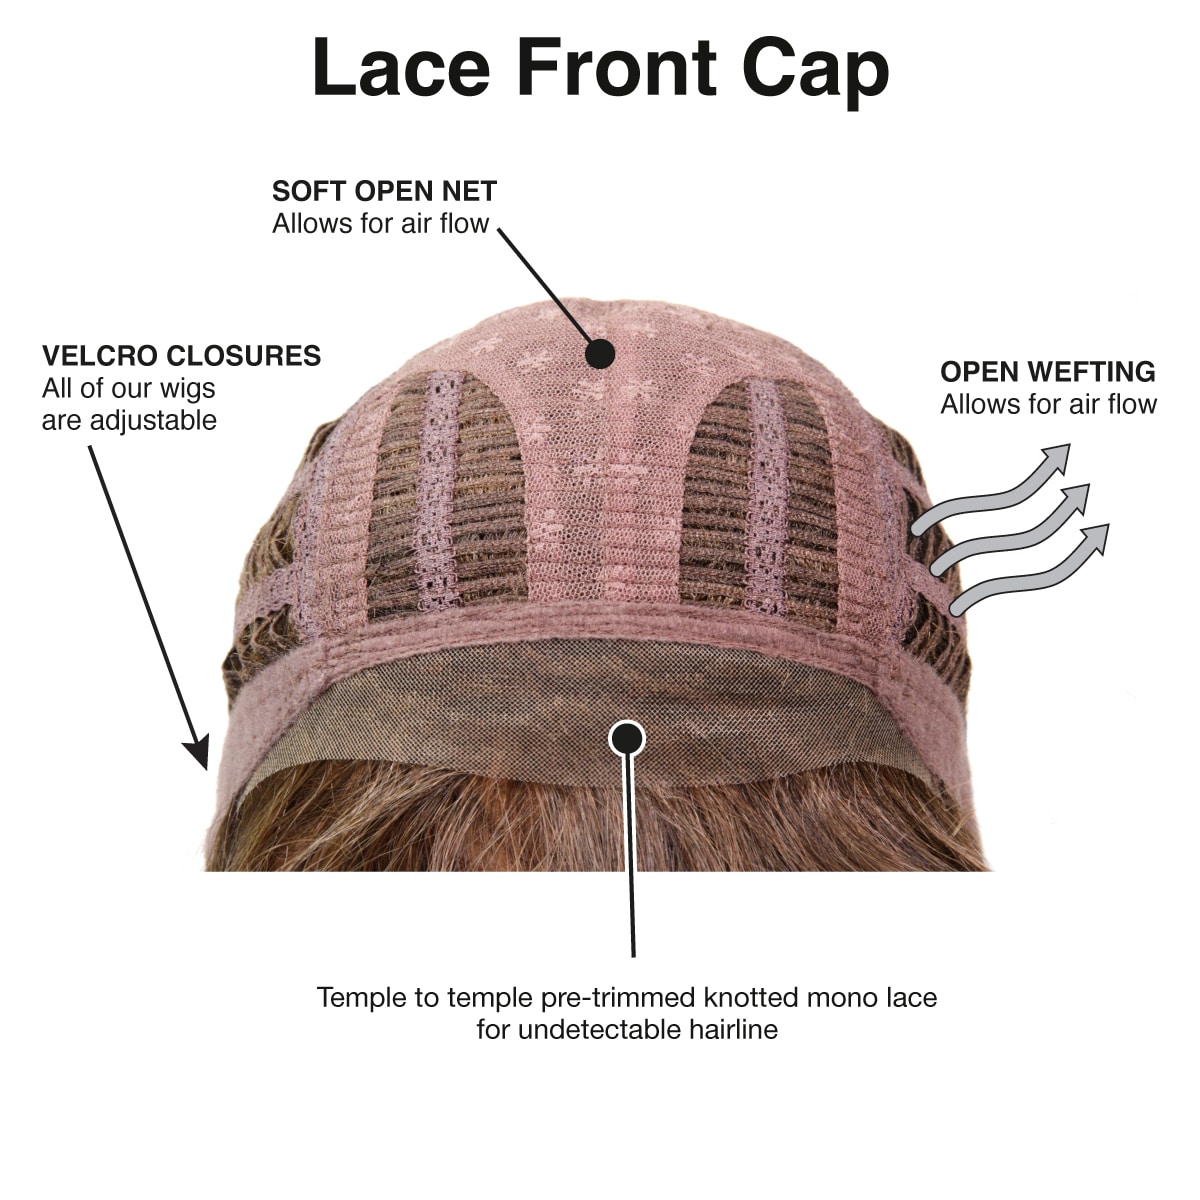 Lace front cap by TressAllure wigs and extensions